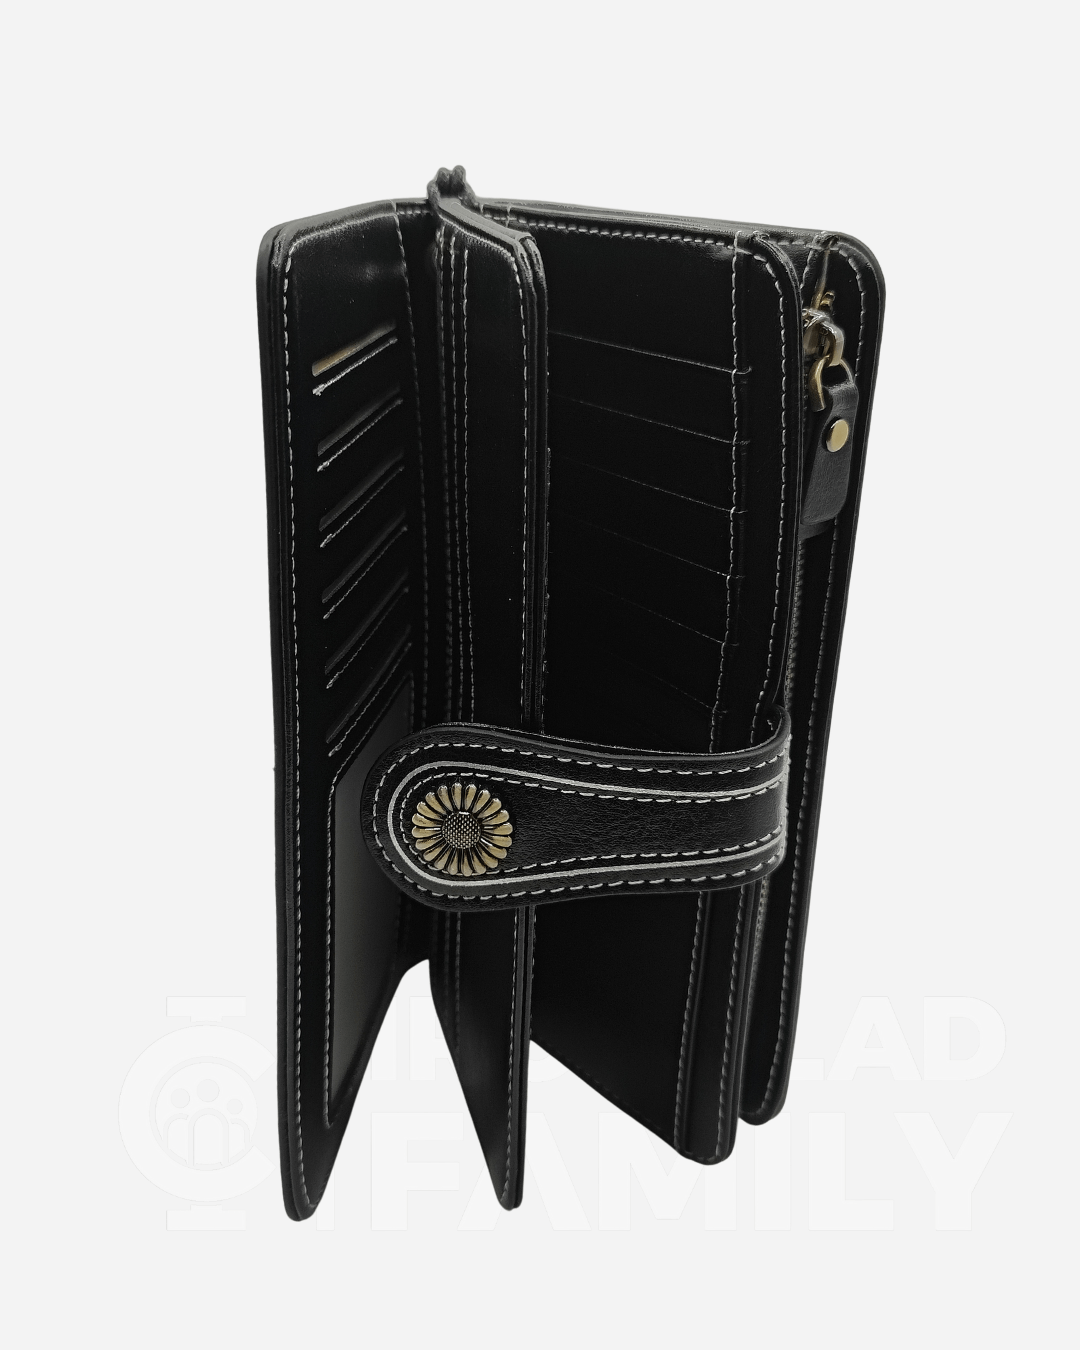 Black RFID Blocking Large Capacity Leather Wallet featuring two compartments